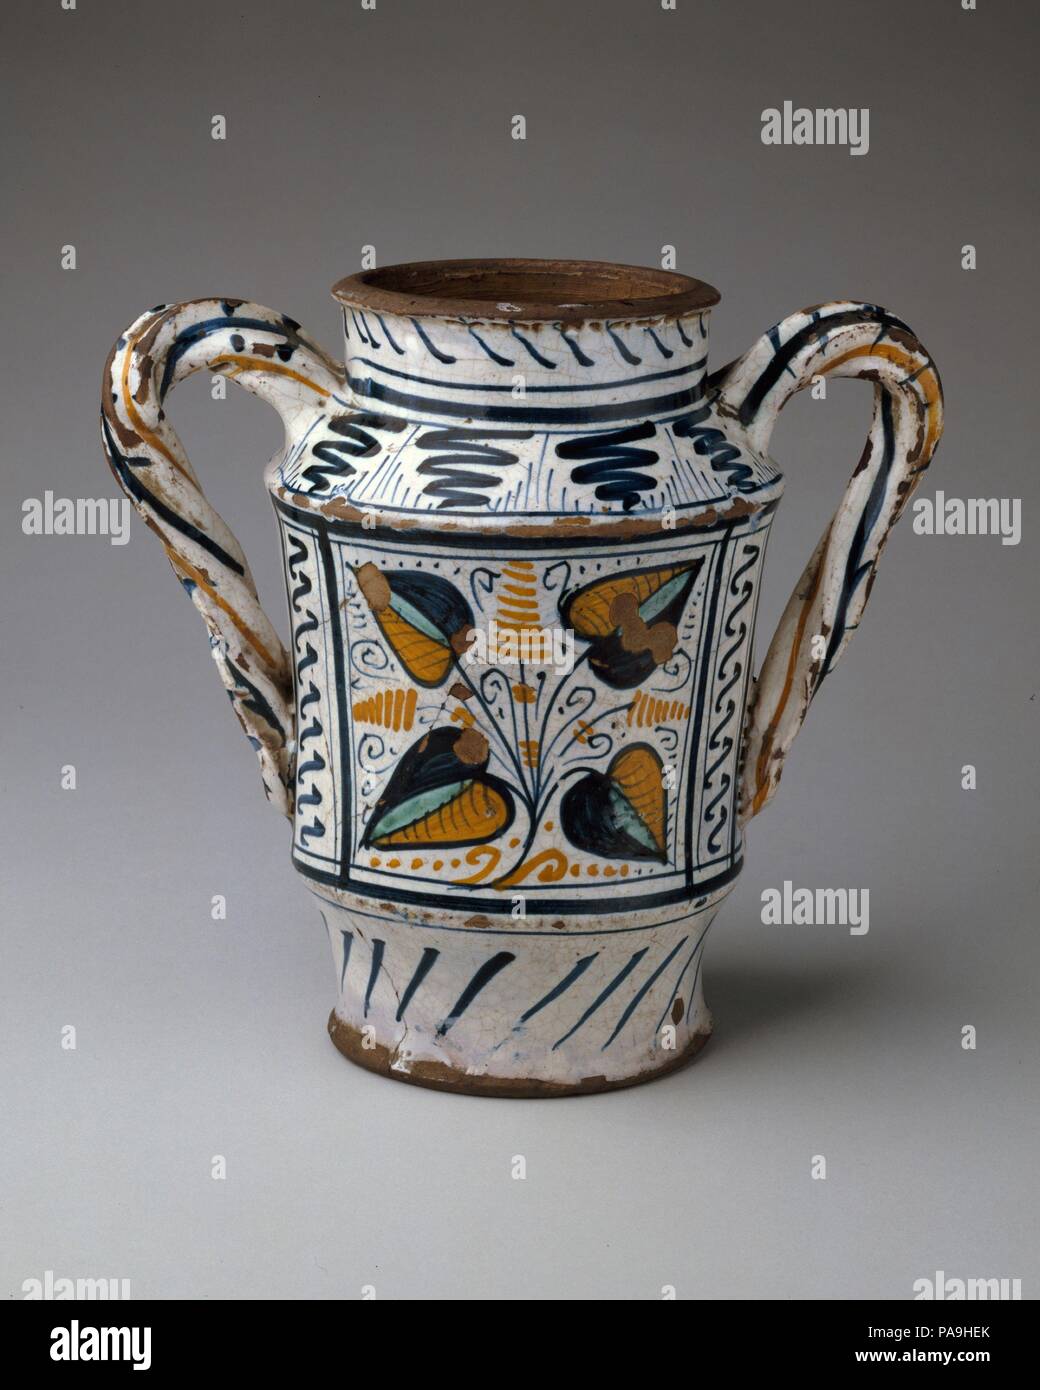 Apothecary Jar (albarello). Culture: Italian, probably Florence or vicinity. Dimensions: H. 8 7/16 in. (21.4 cm). Date: ca. 1470-90. Museum: Metropolitan Museum of Art, New York, USA. Stock Photo